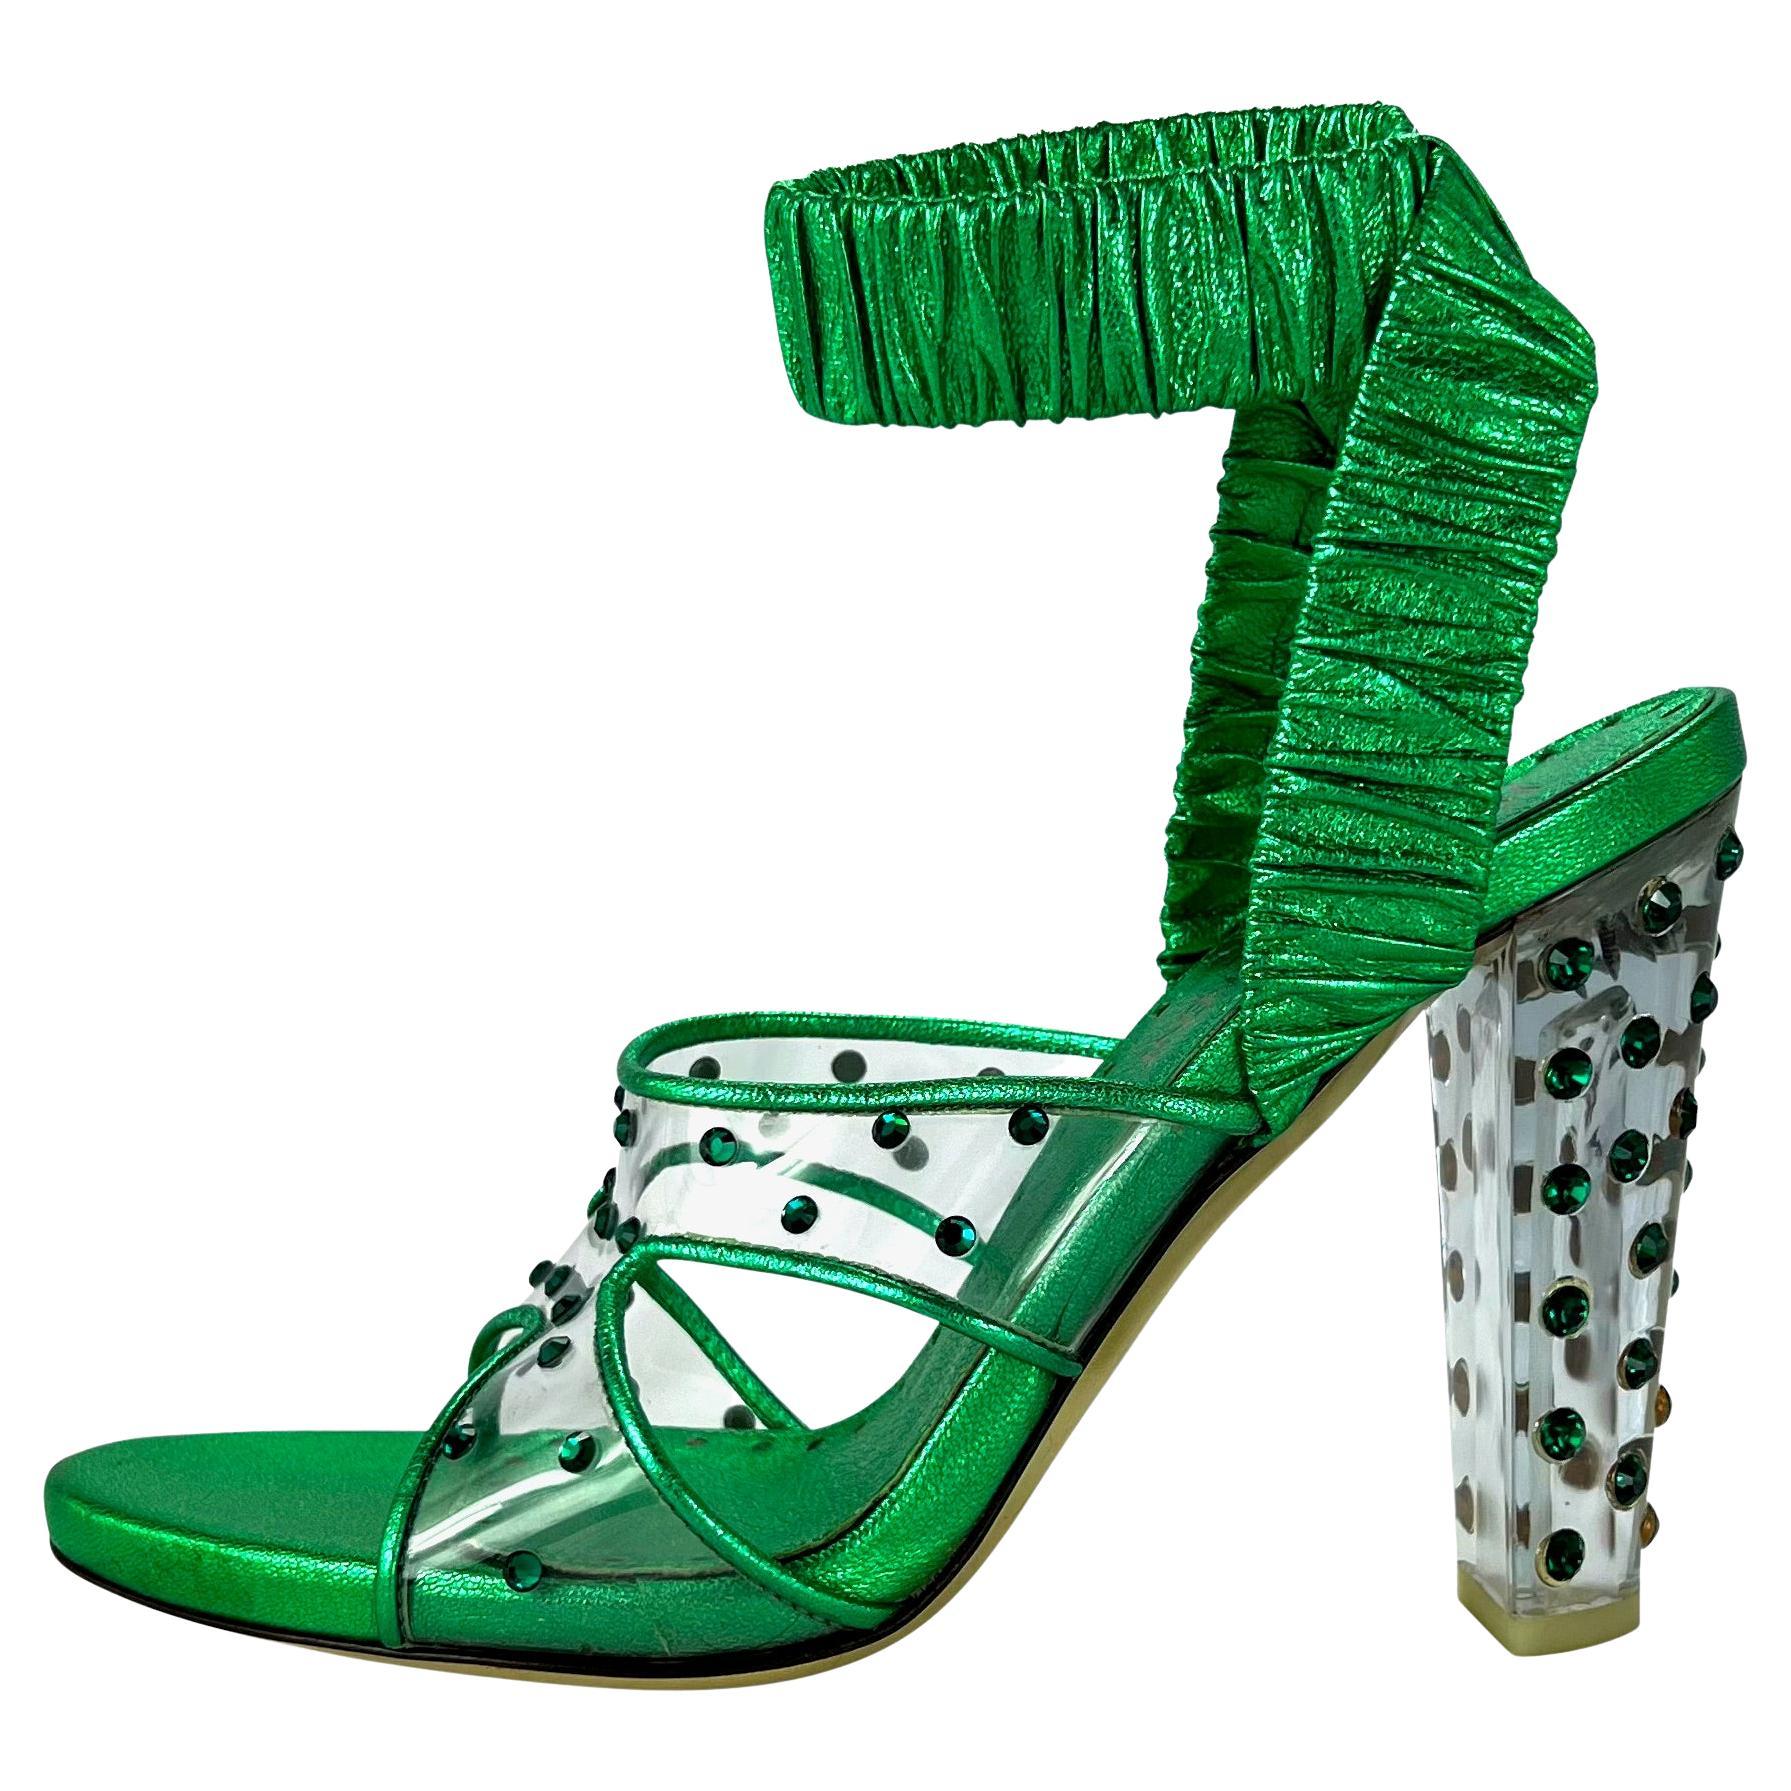 F/W 2003 Yves Saint Laurent by Tom Ford Green Rhinestone Lucite Pumps Size 38 en vente